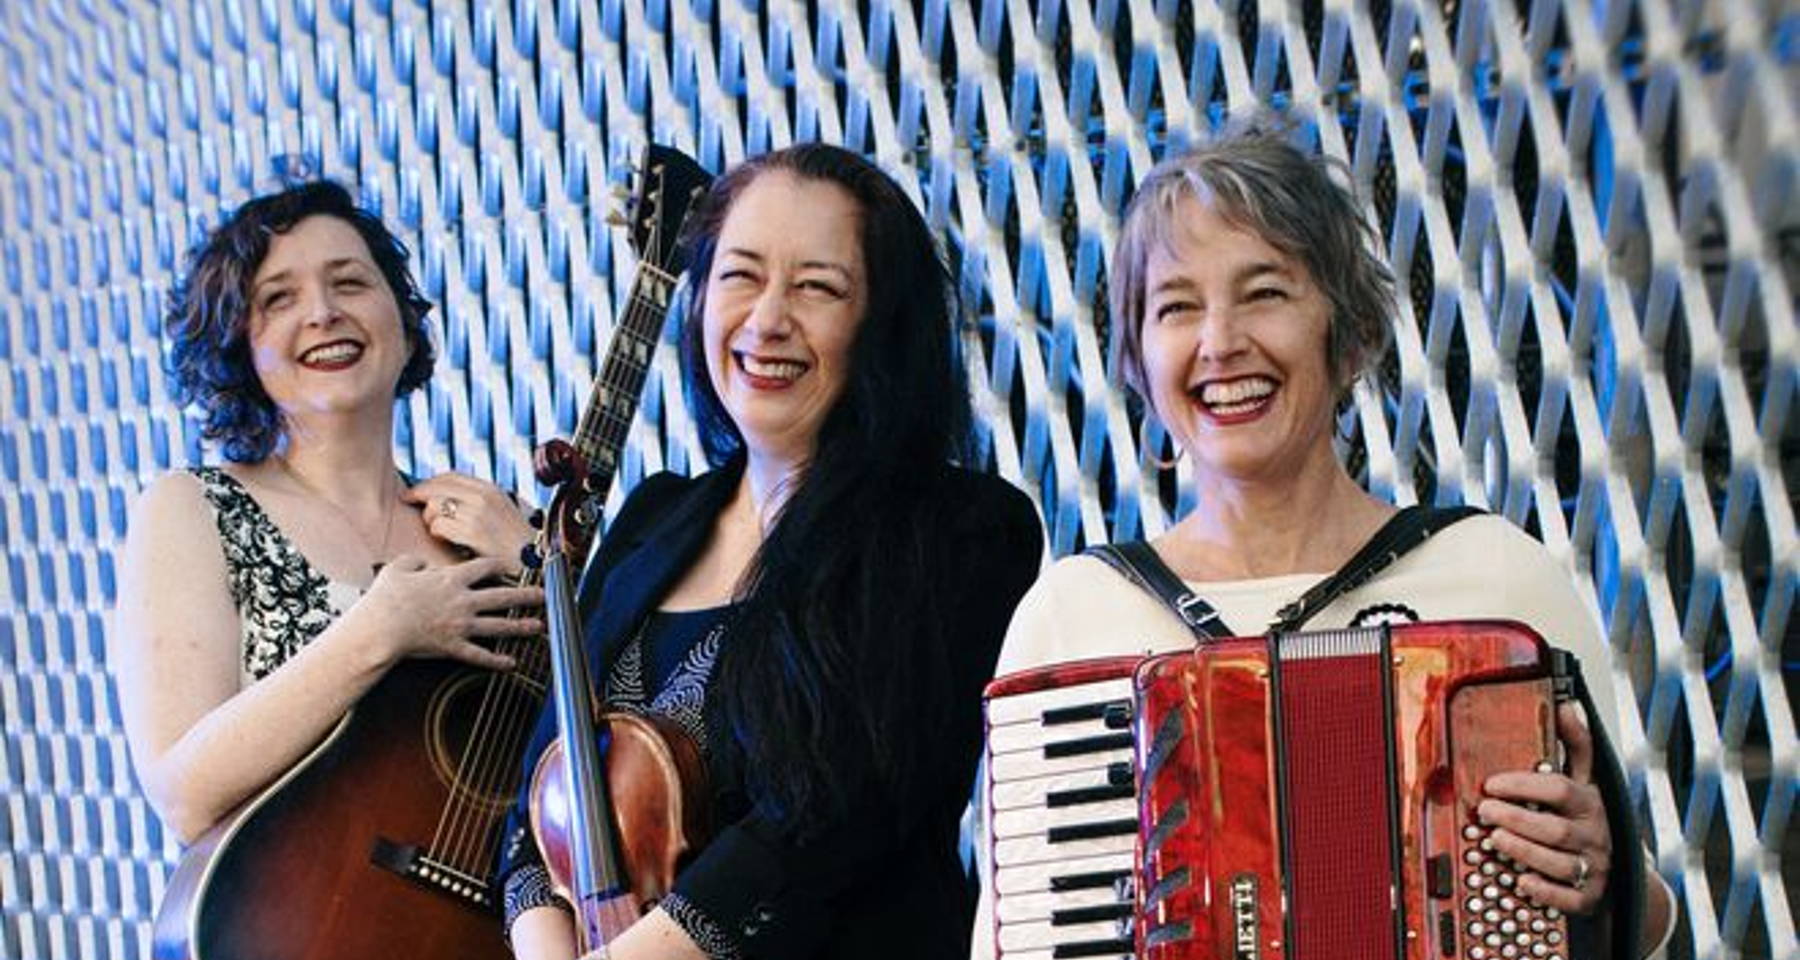 True Life Trio in the Mission - Global vocal, accordion and strings harmonies from Europe and the American South